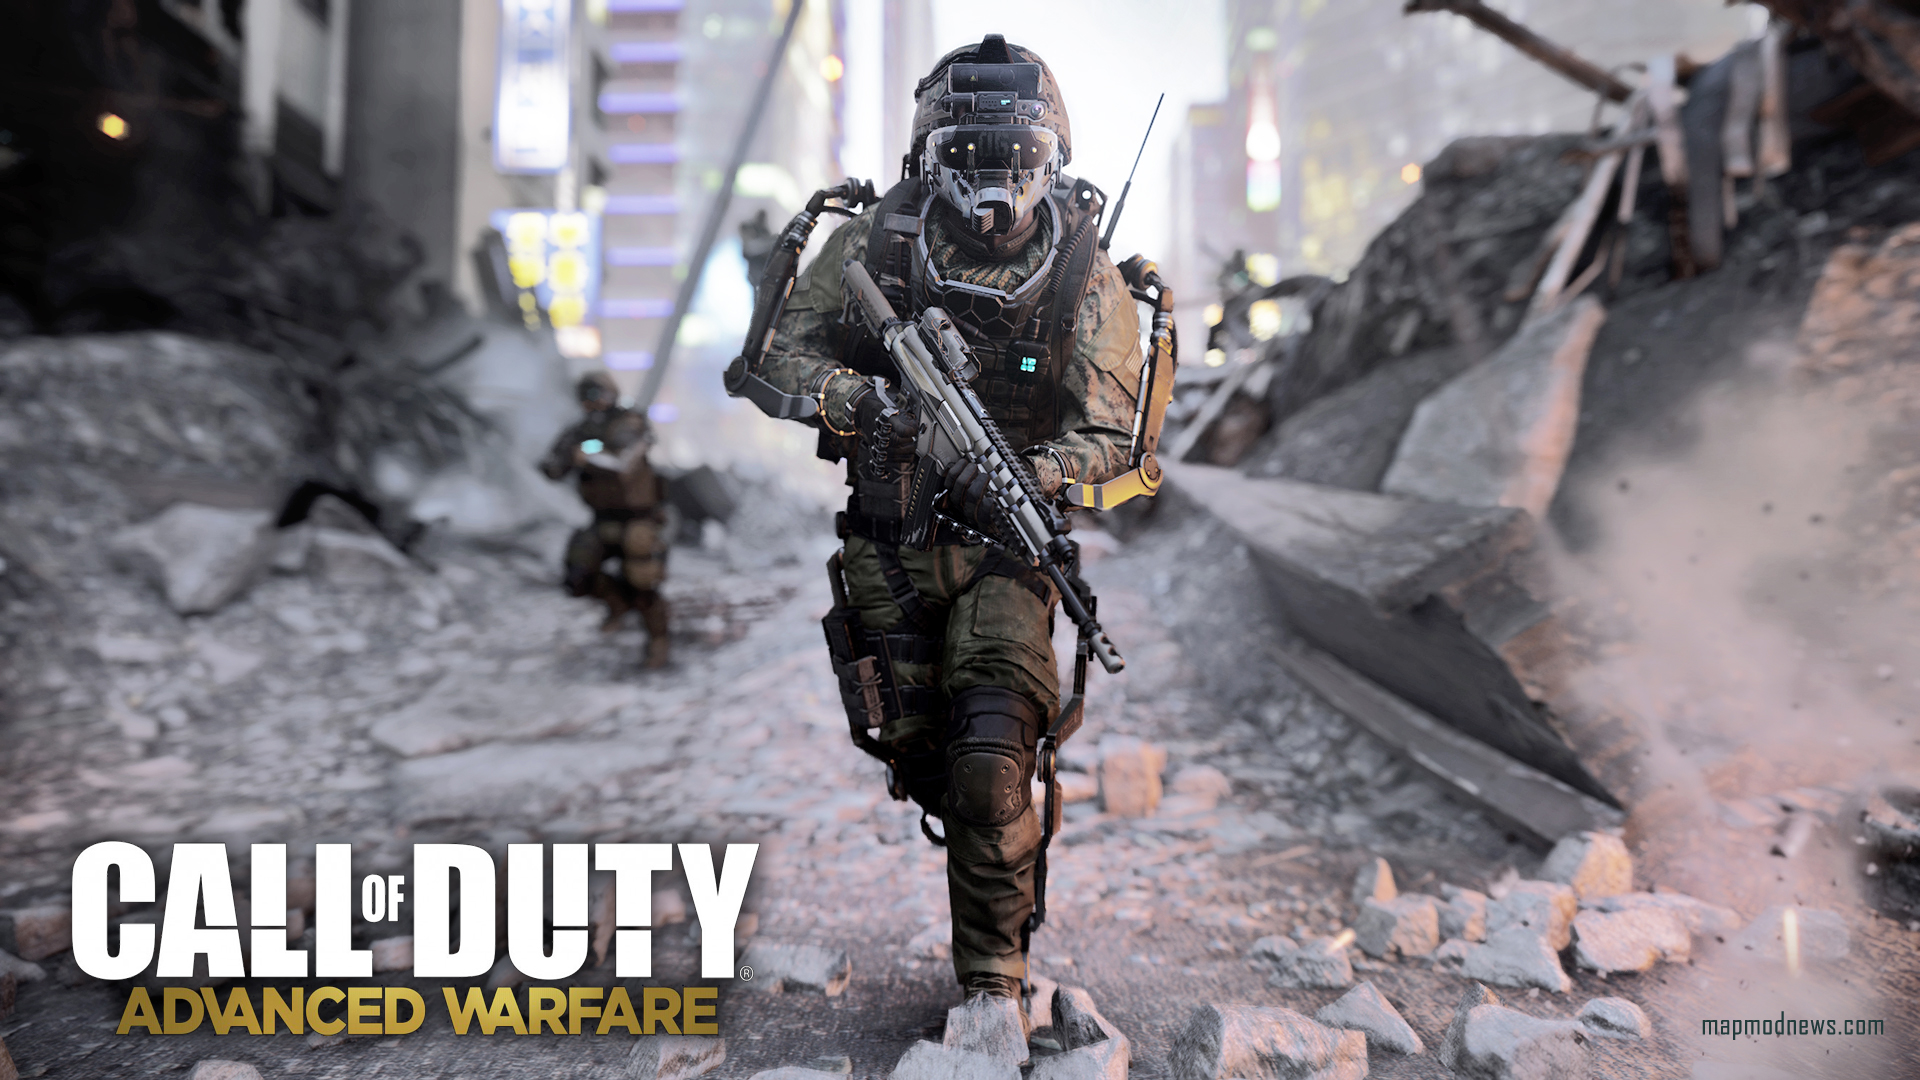 Call of Duty Advanced Warfare recommended PC system specs   Gadget 1920x1080